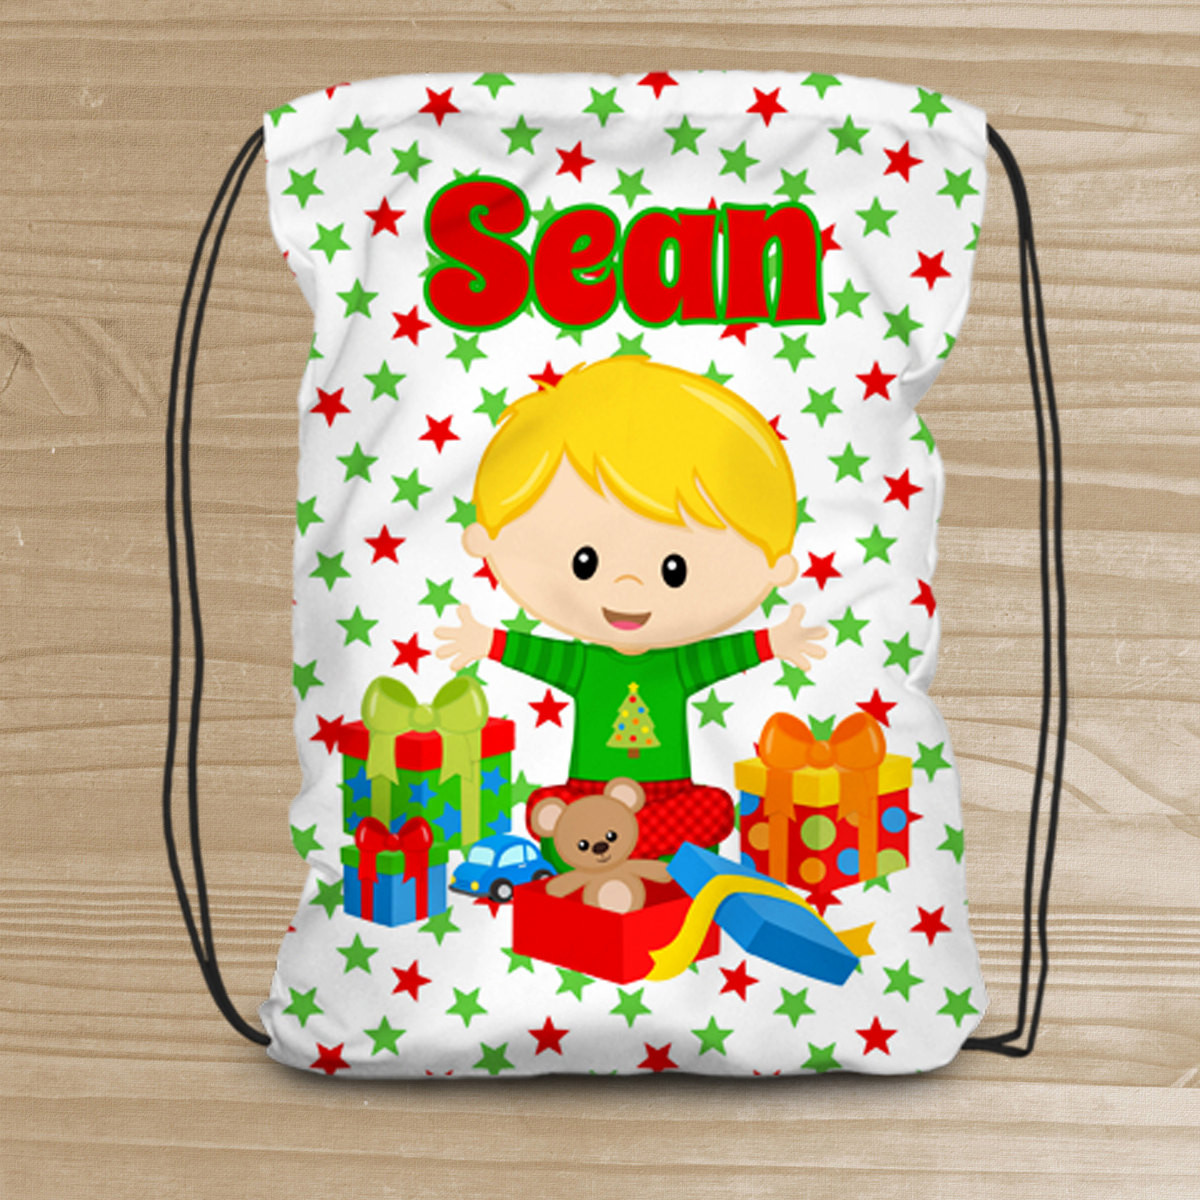 Personalized Christmas Gifts For Kids
 Personalized Christmas Stocking Bag for Kids Christmas Gift